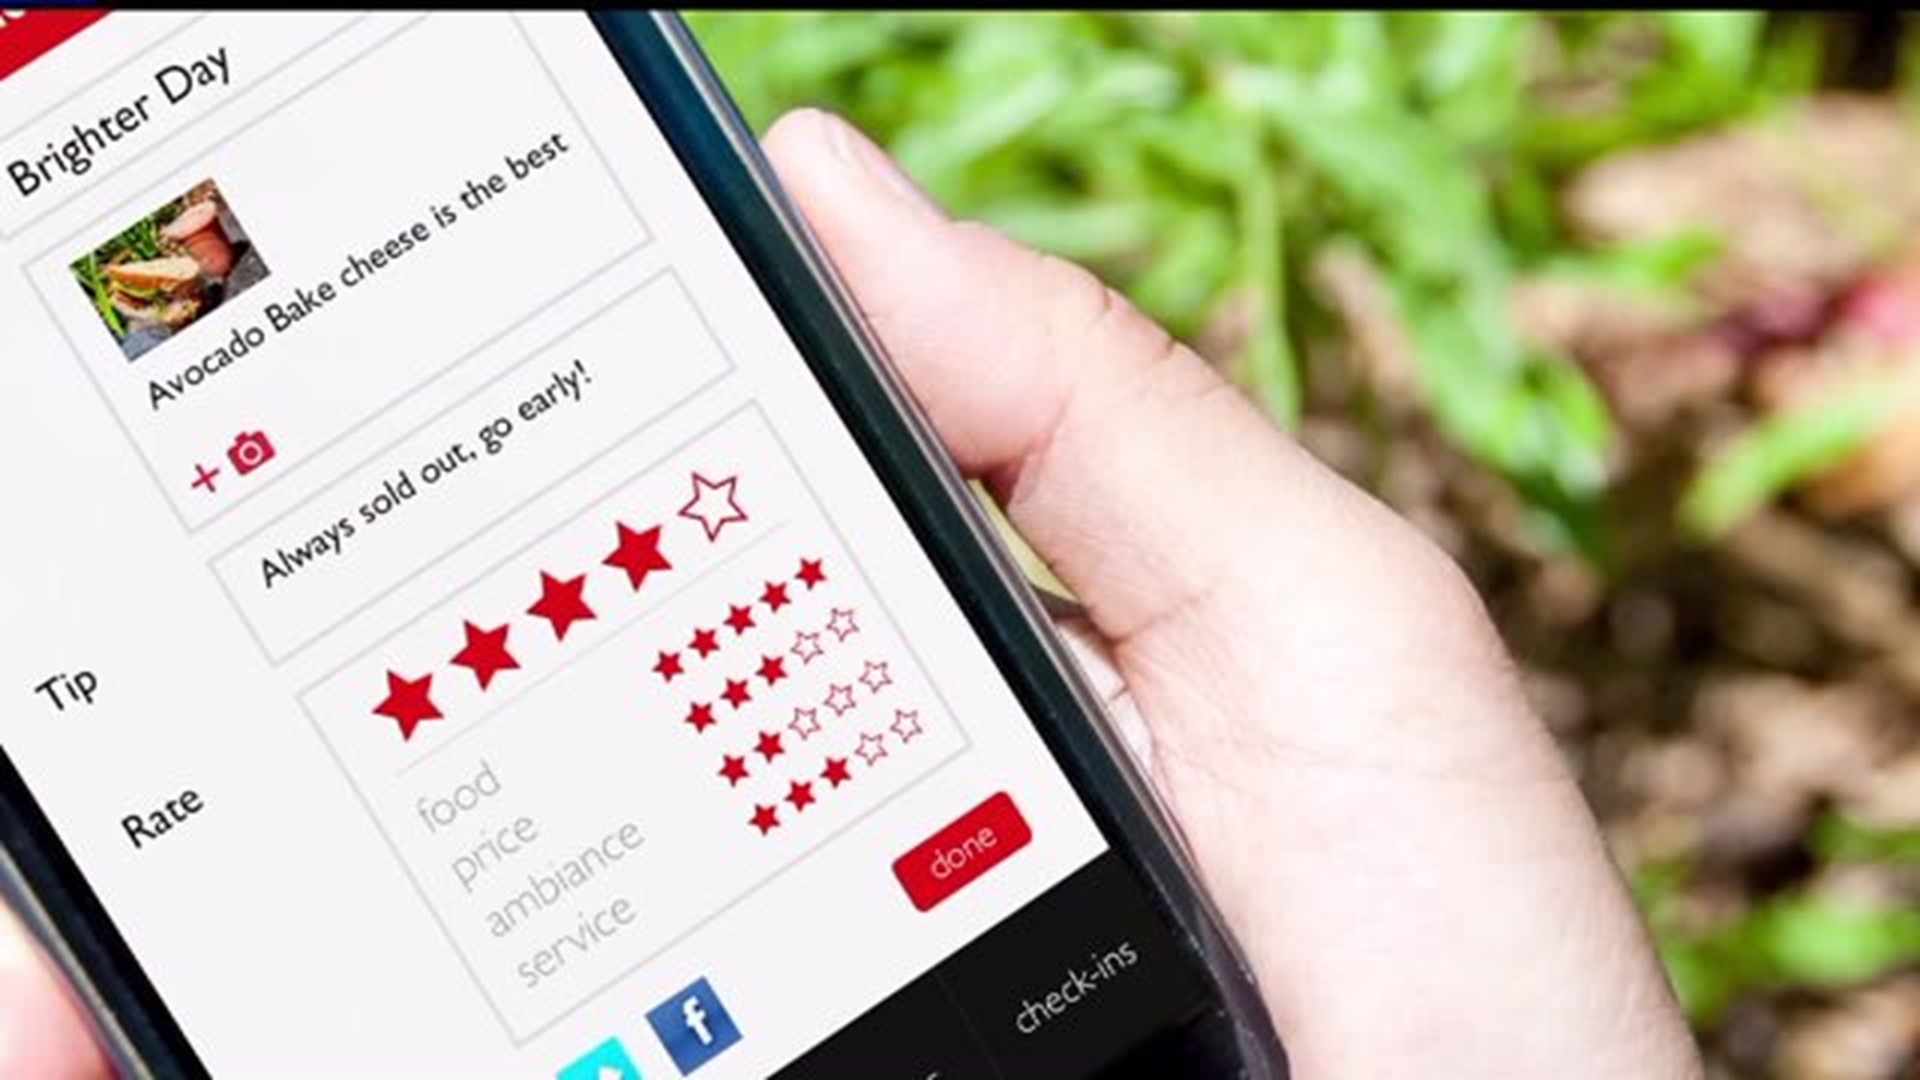 Protecting online reviews